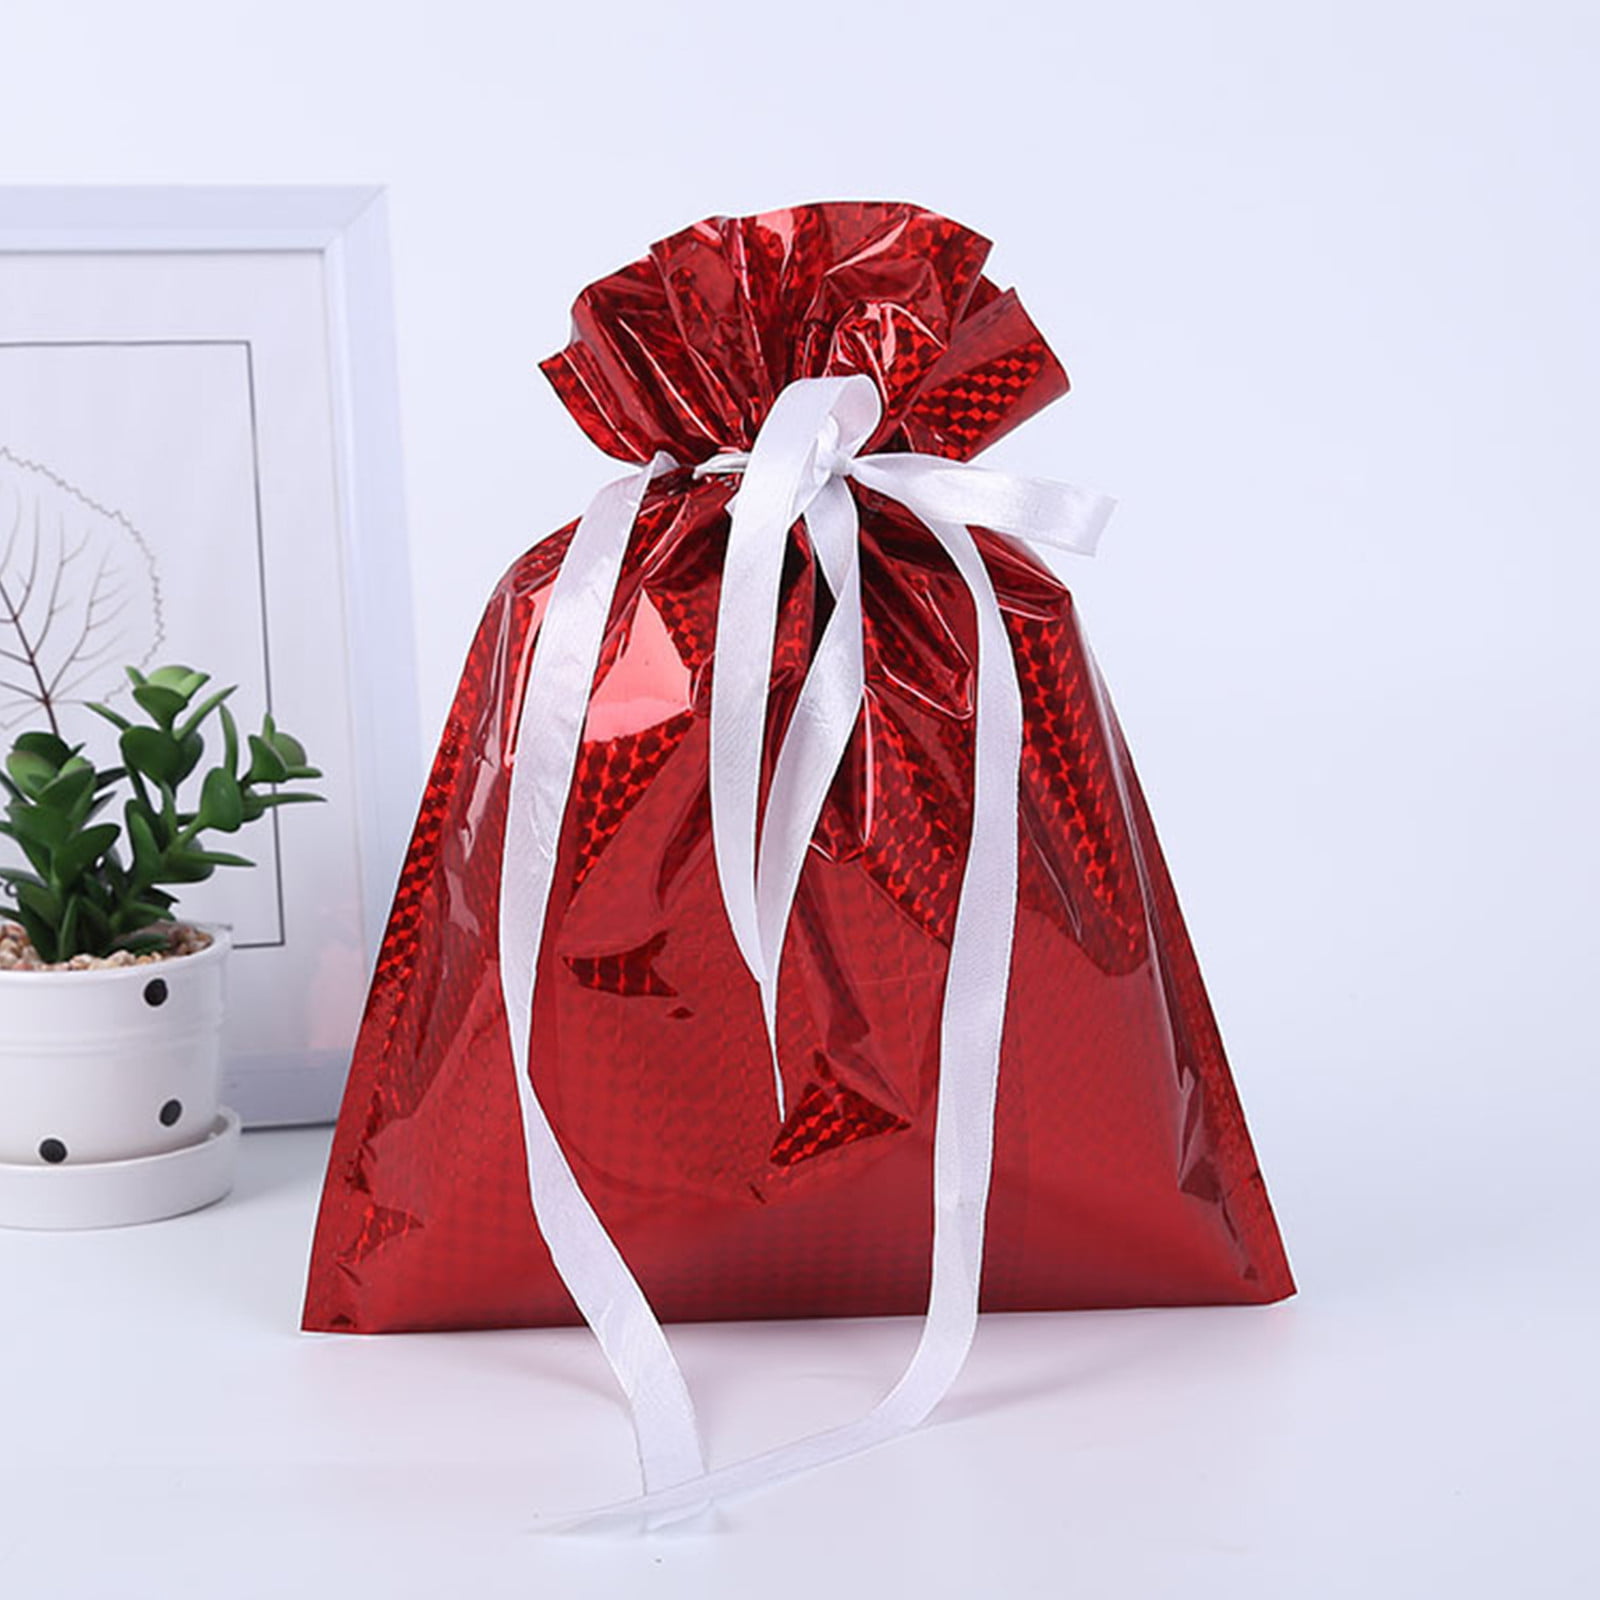 Details about   Party Goodies Packaging Gift Bags Sweet Candies Birthday Present Pouch Bag 50pcs 